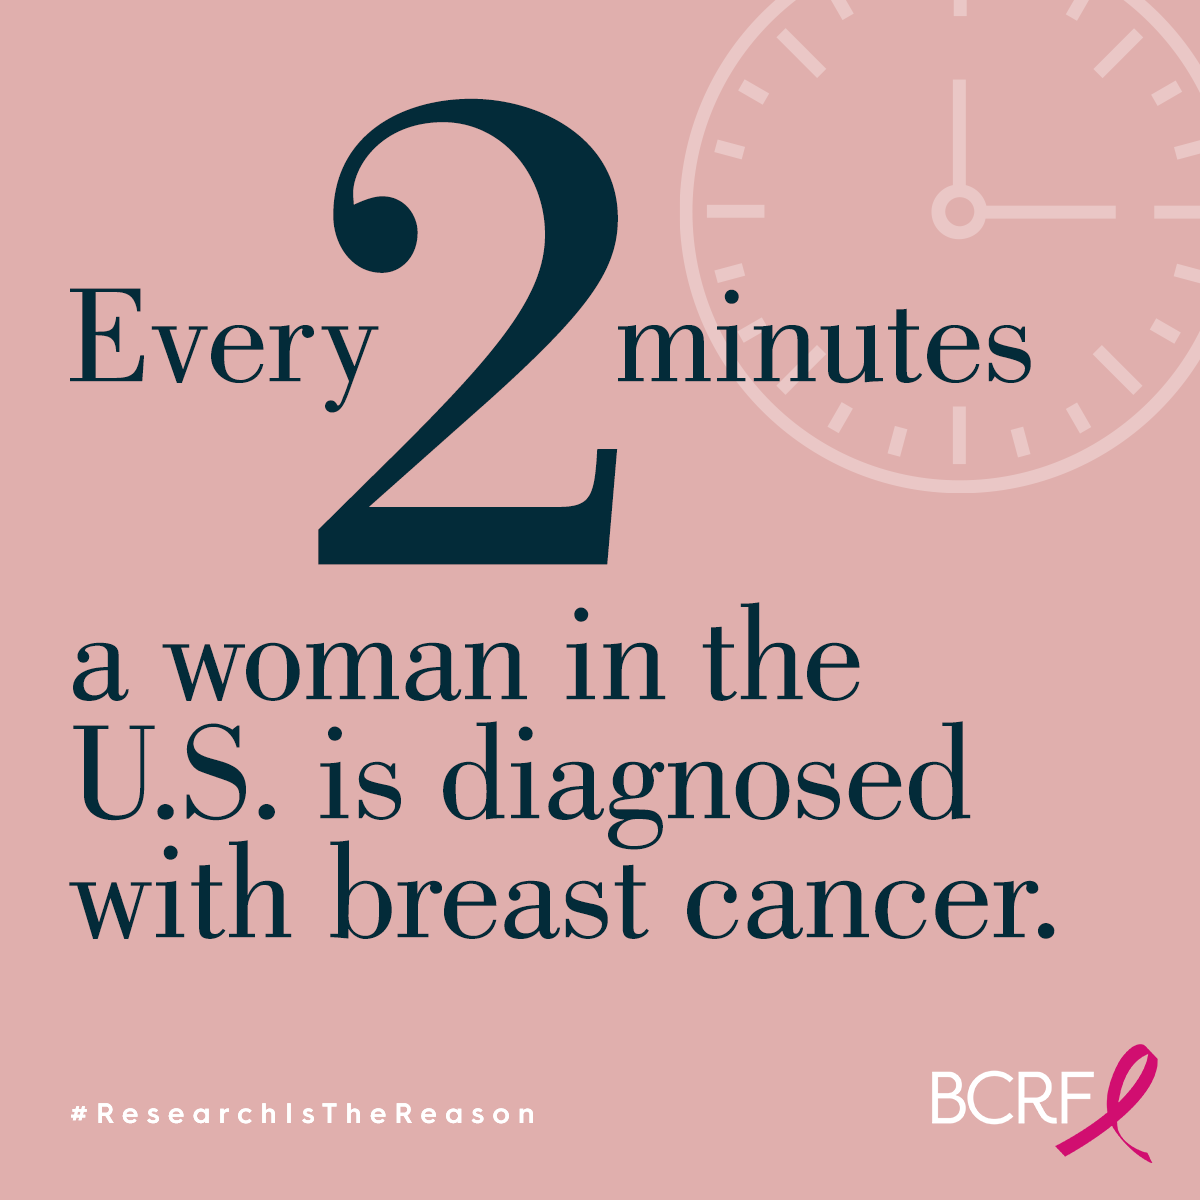 Every 2 minutes a woman in the U.S. is diagnosed with breast cancer